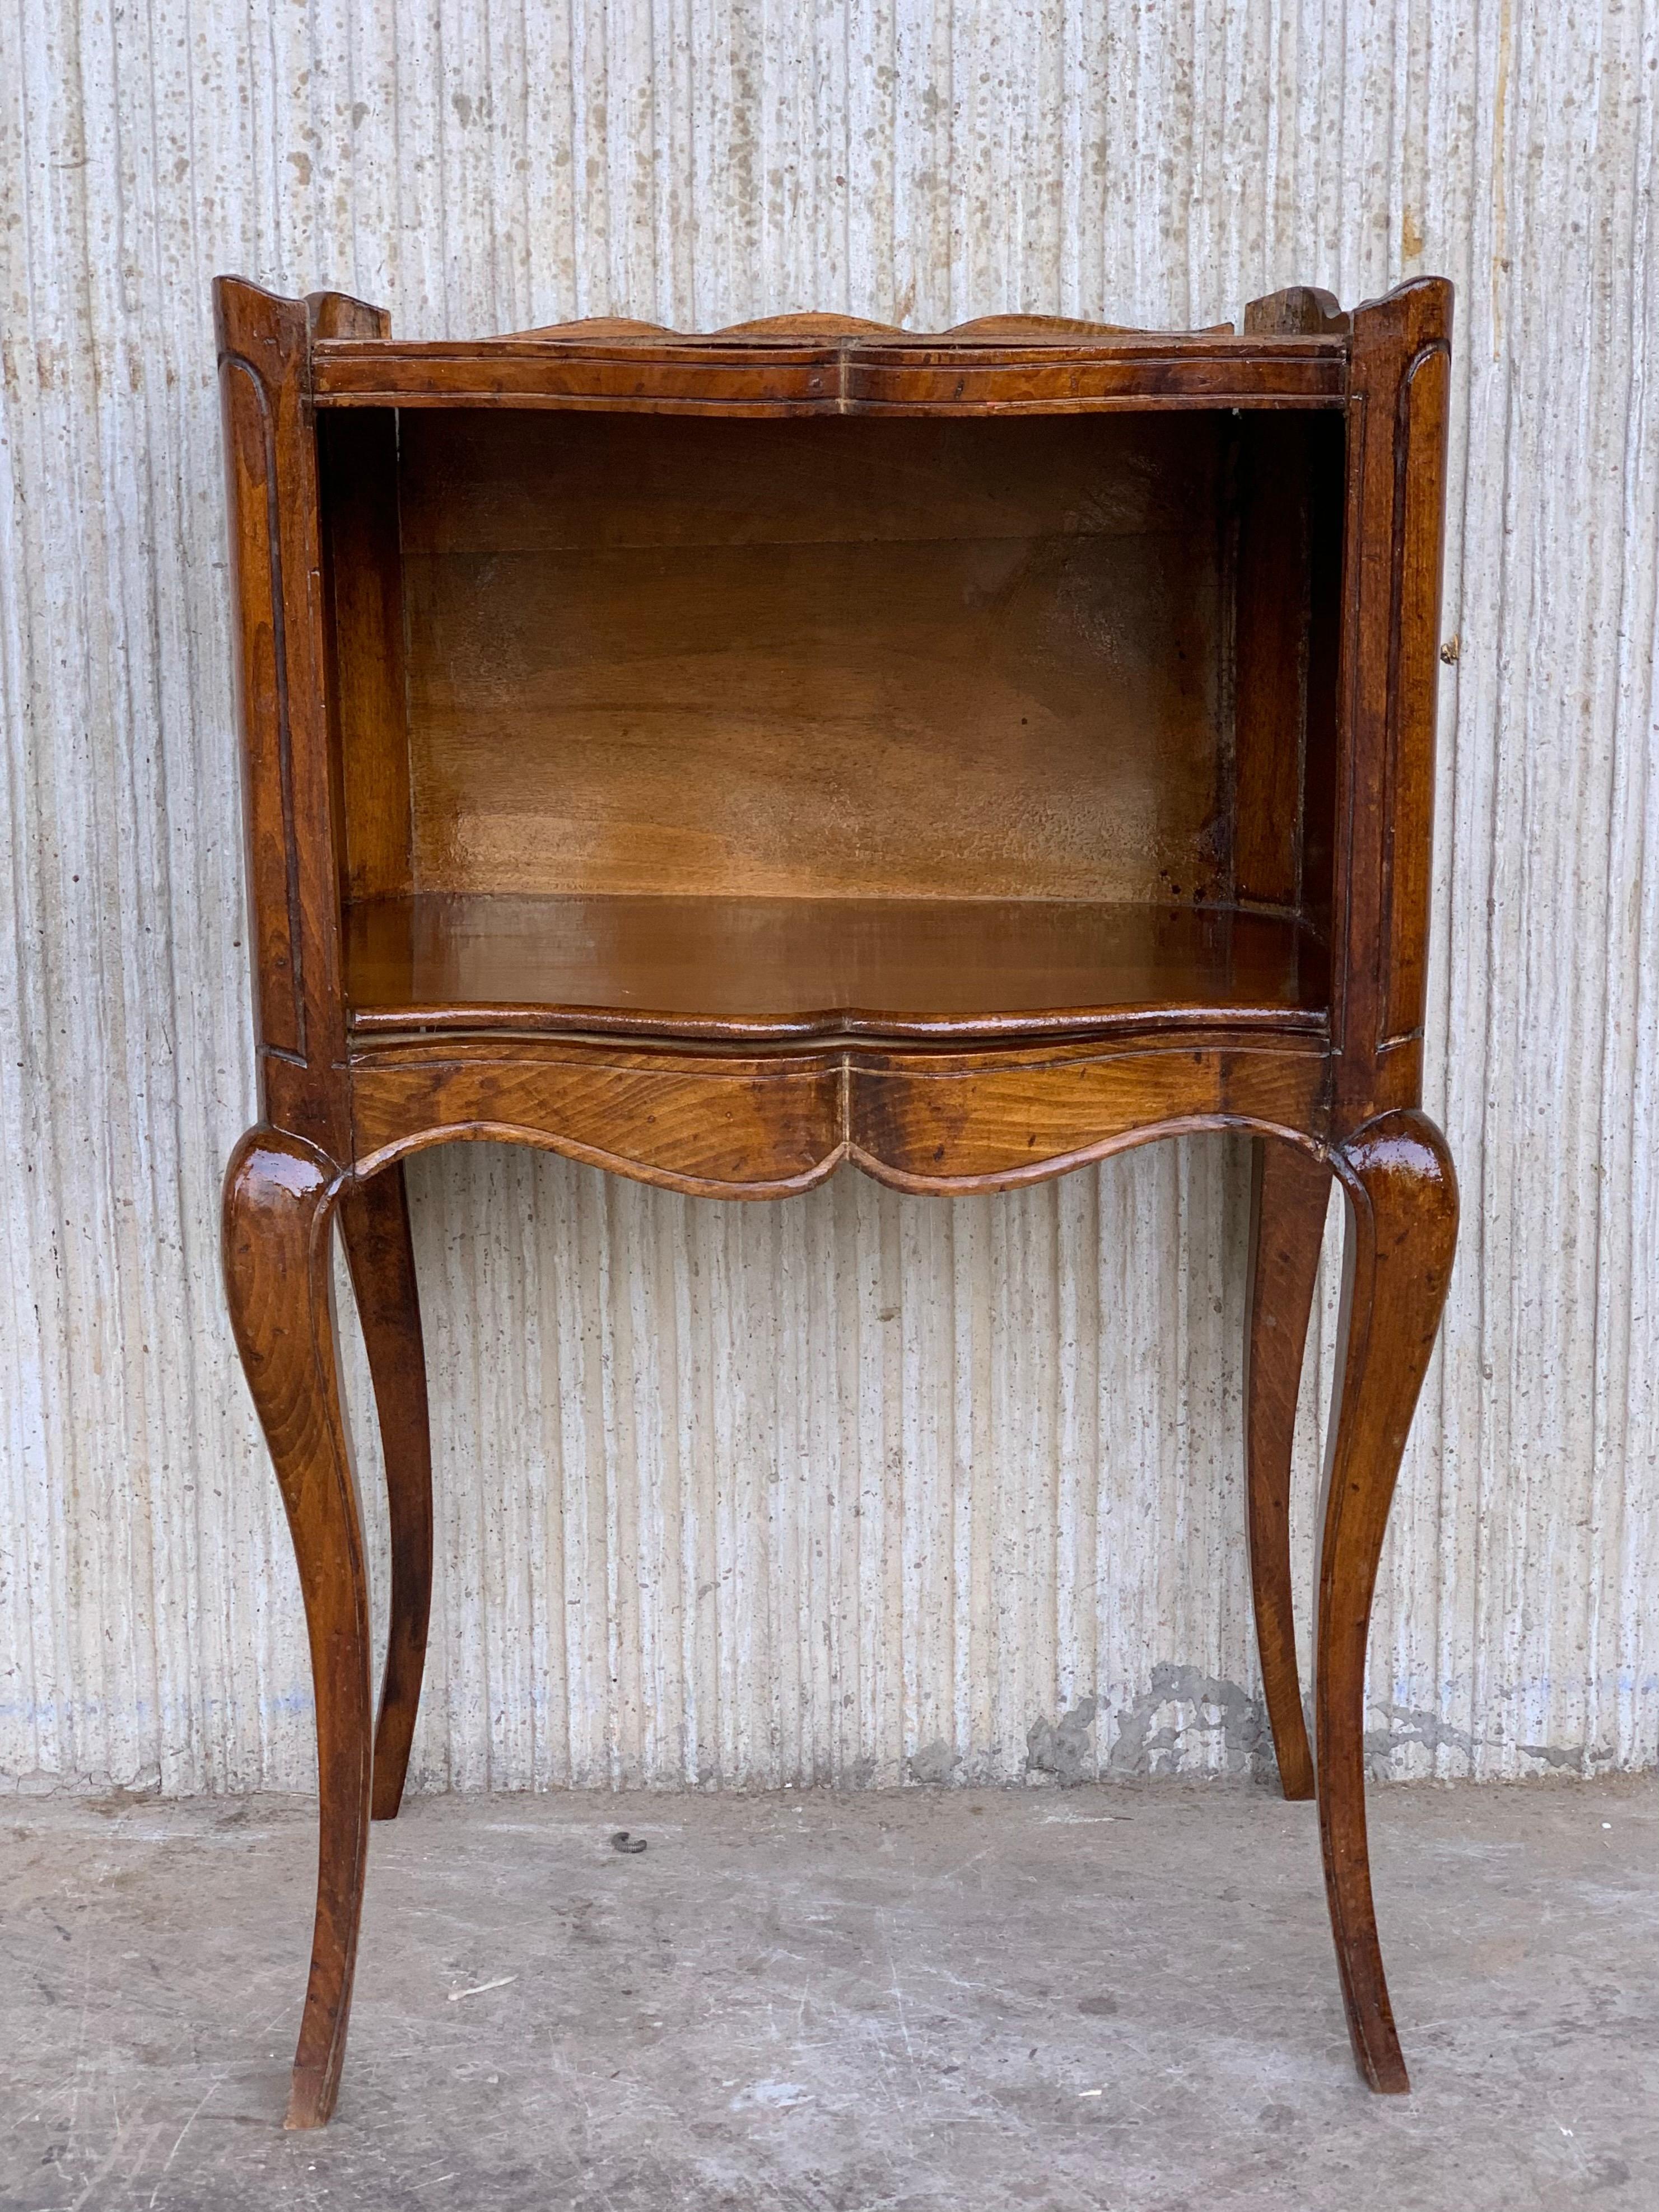 Walnut French Louis XV Style 19th Century Wooden Bedside Table with Open Shelf For Sale